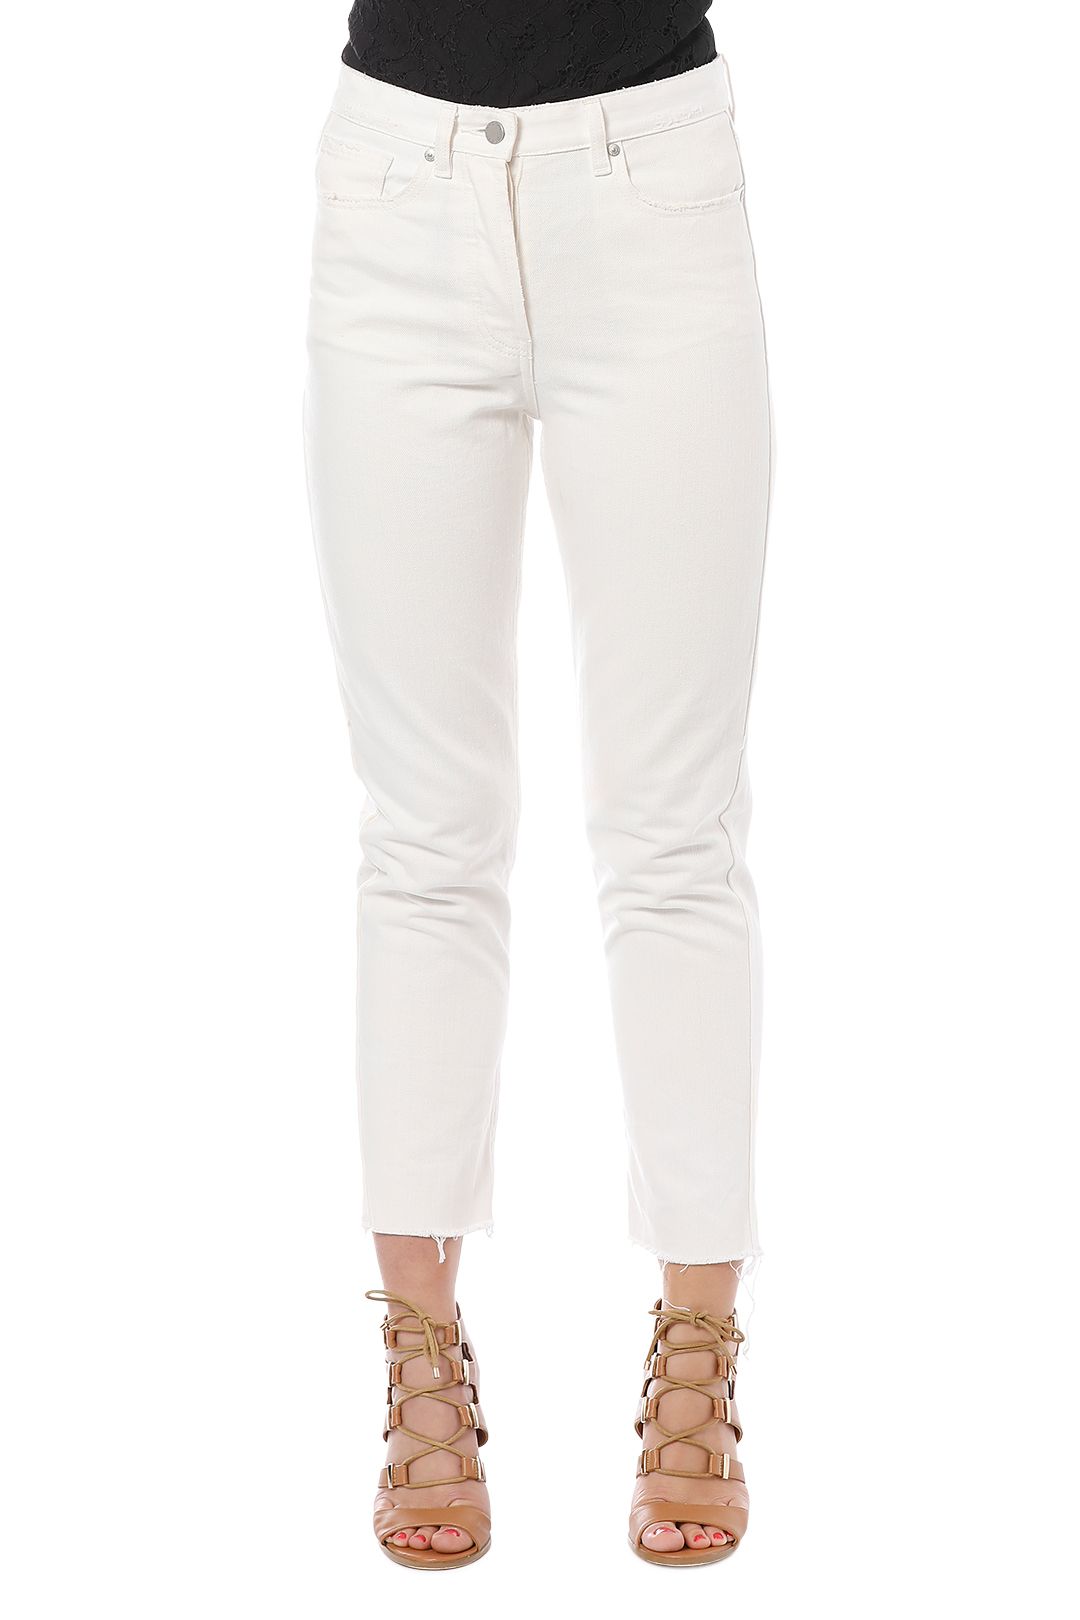 Camilla and Marc - Margot Cropped Straight Leg Jeans - White - Front Crop